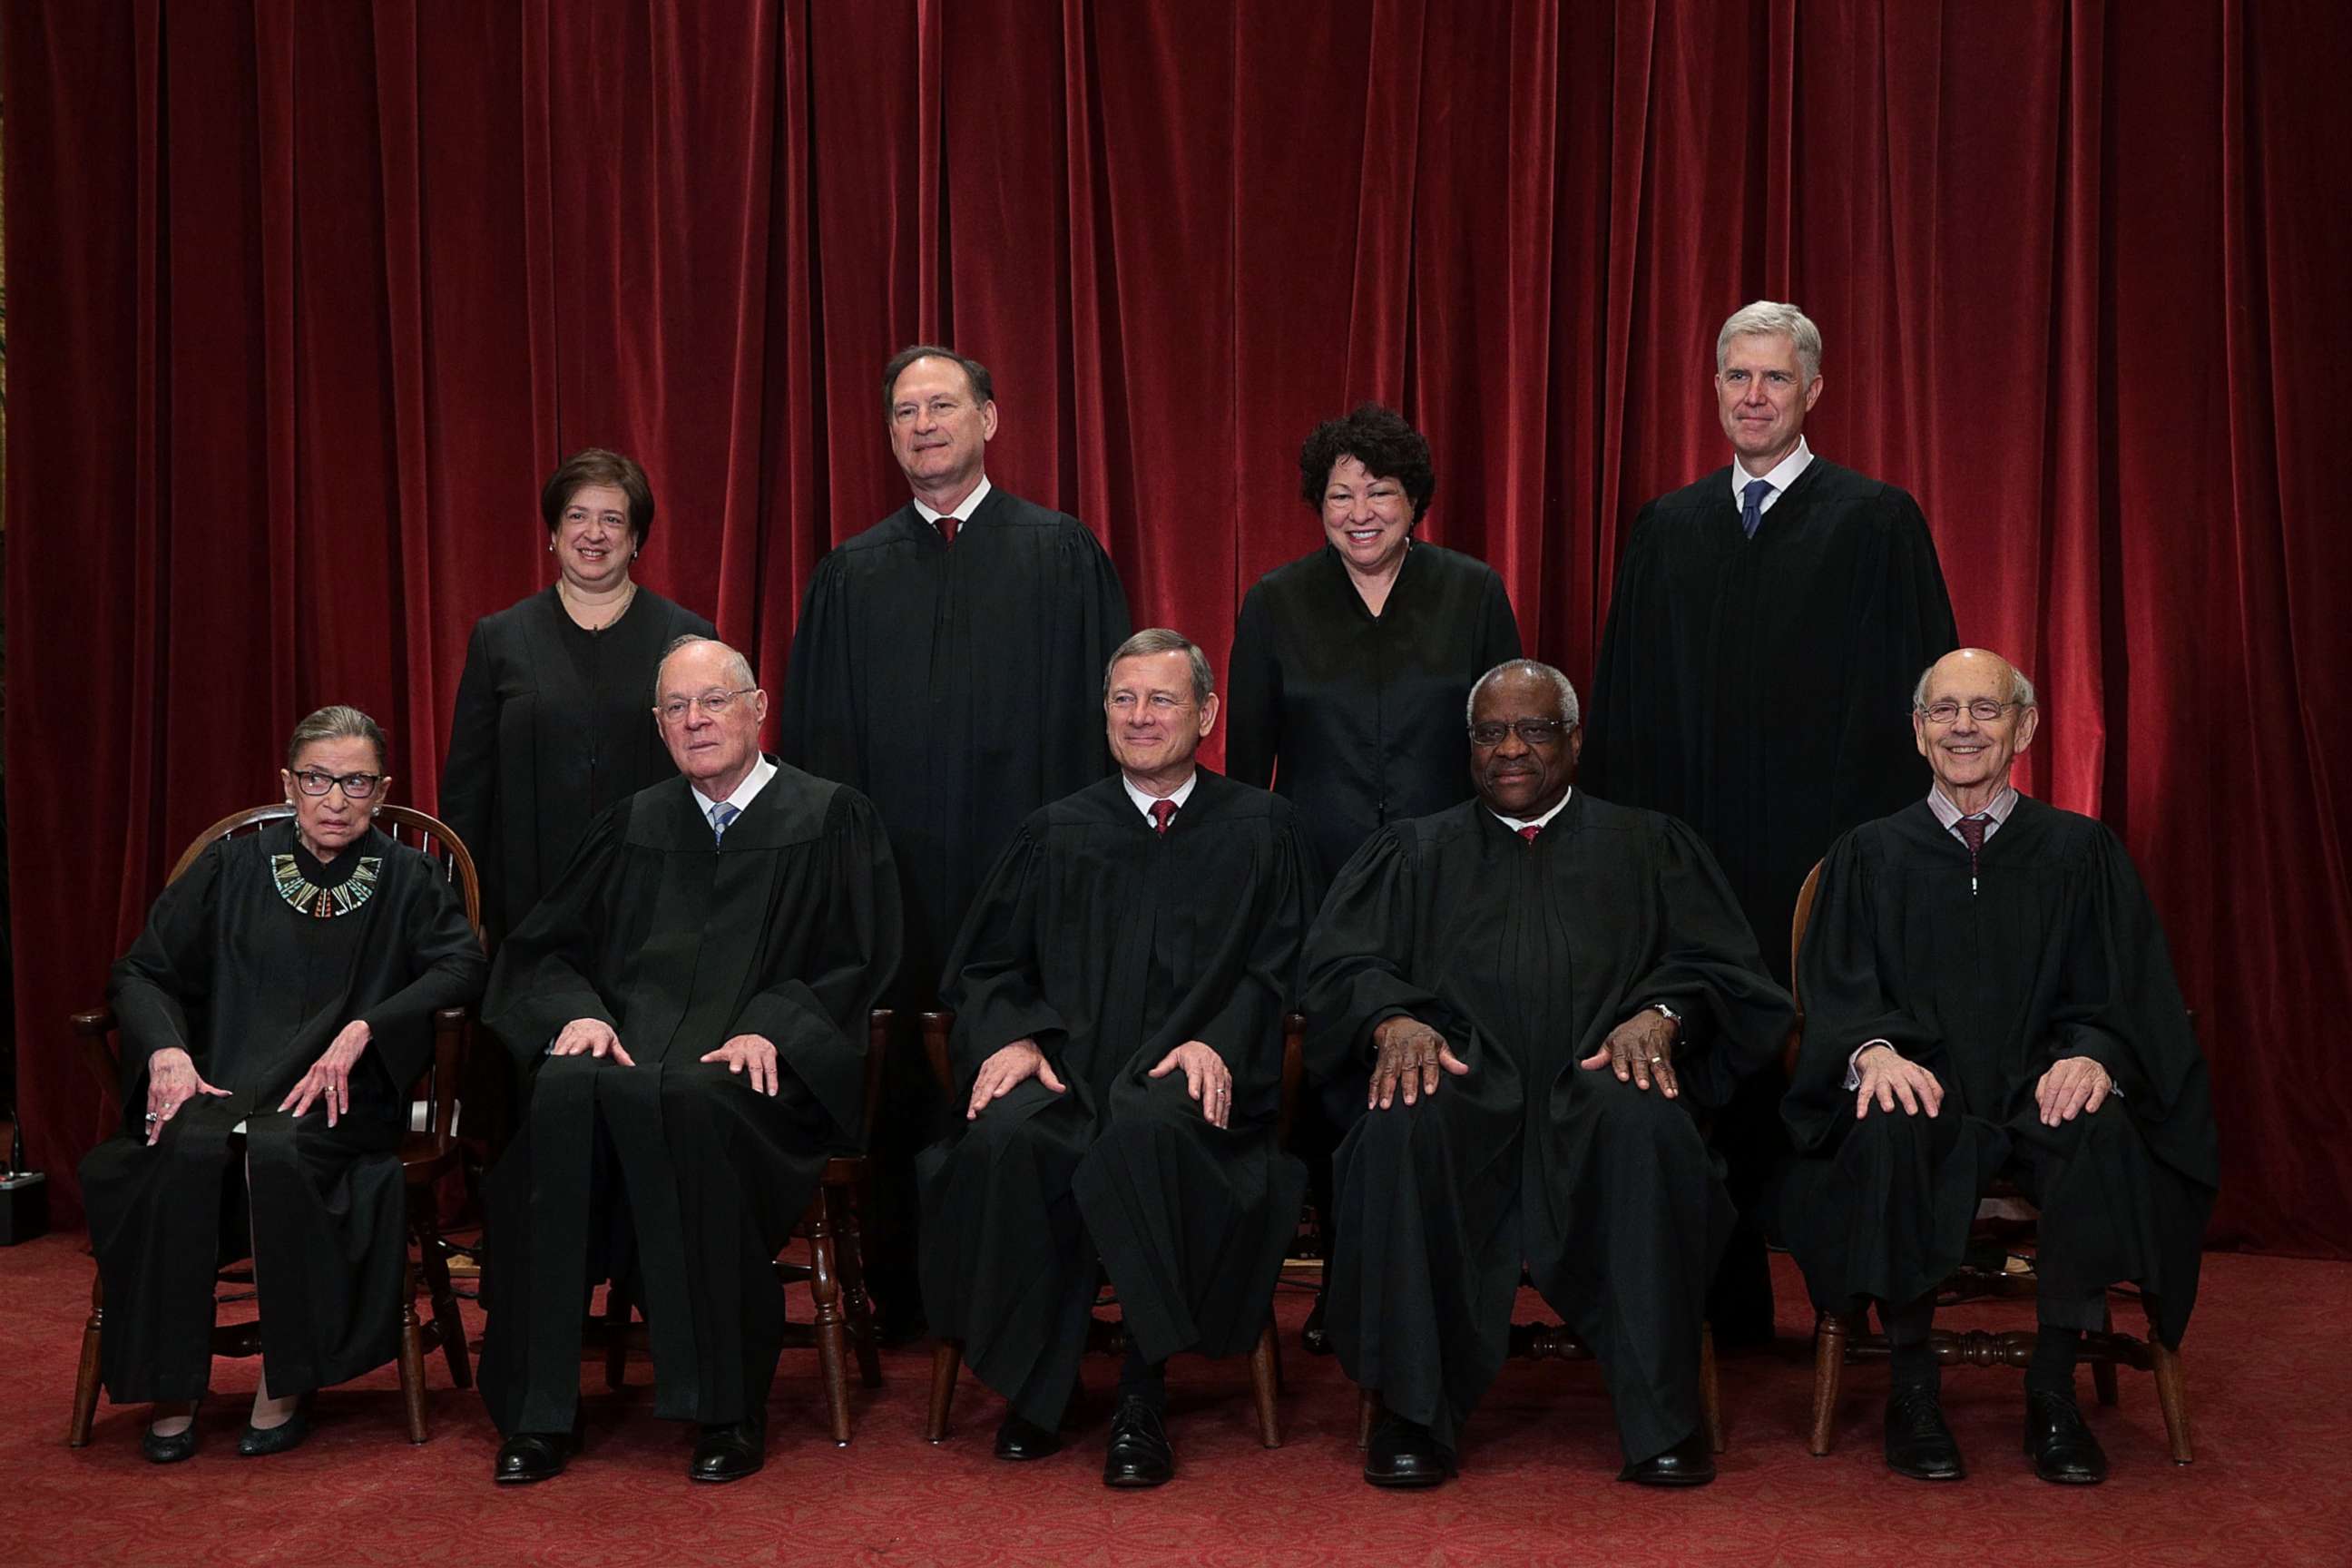 PHOTO: Members of the Supreme Court in a 2017 group portrait including Associate Justice Anthony M. Kennedy, front row, second from left.